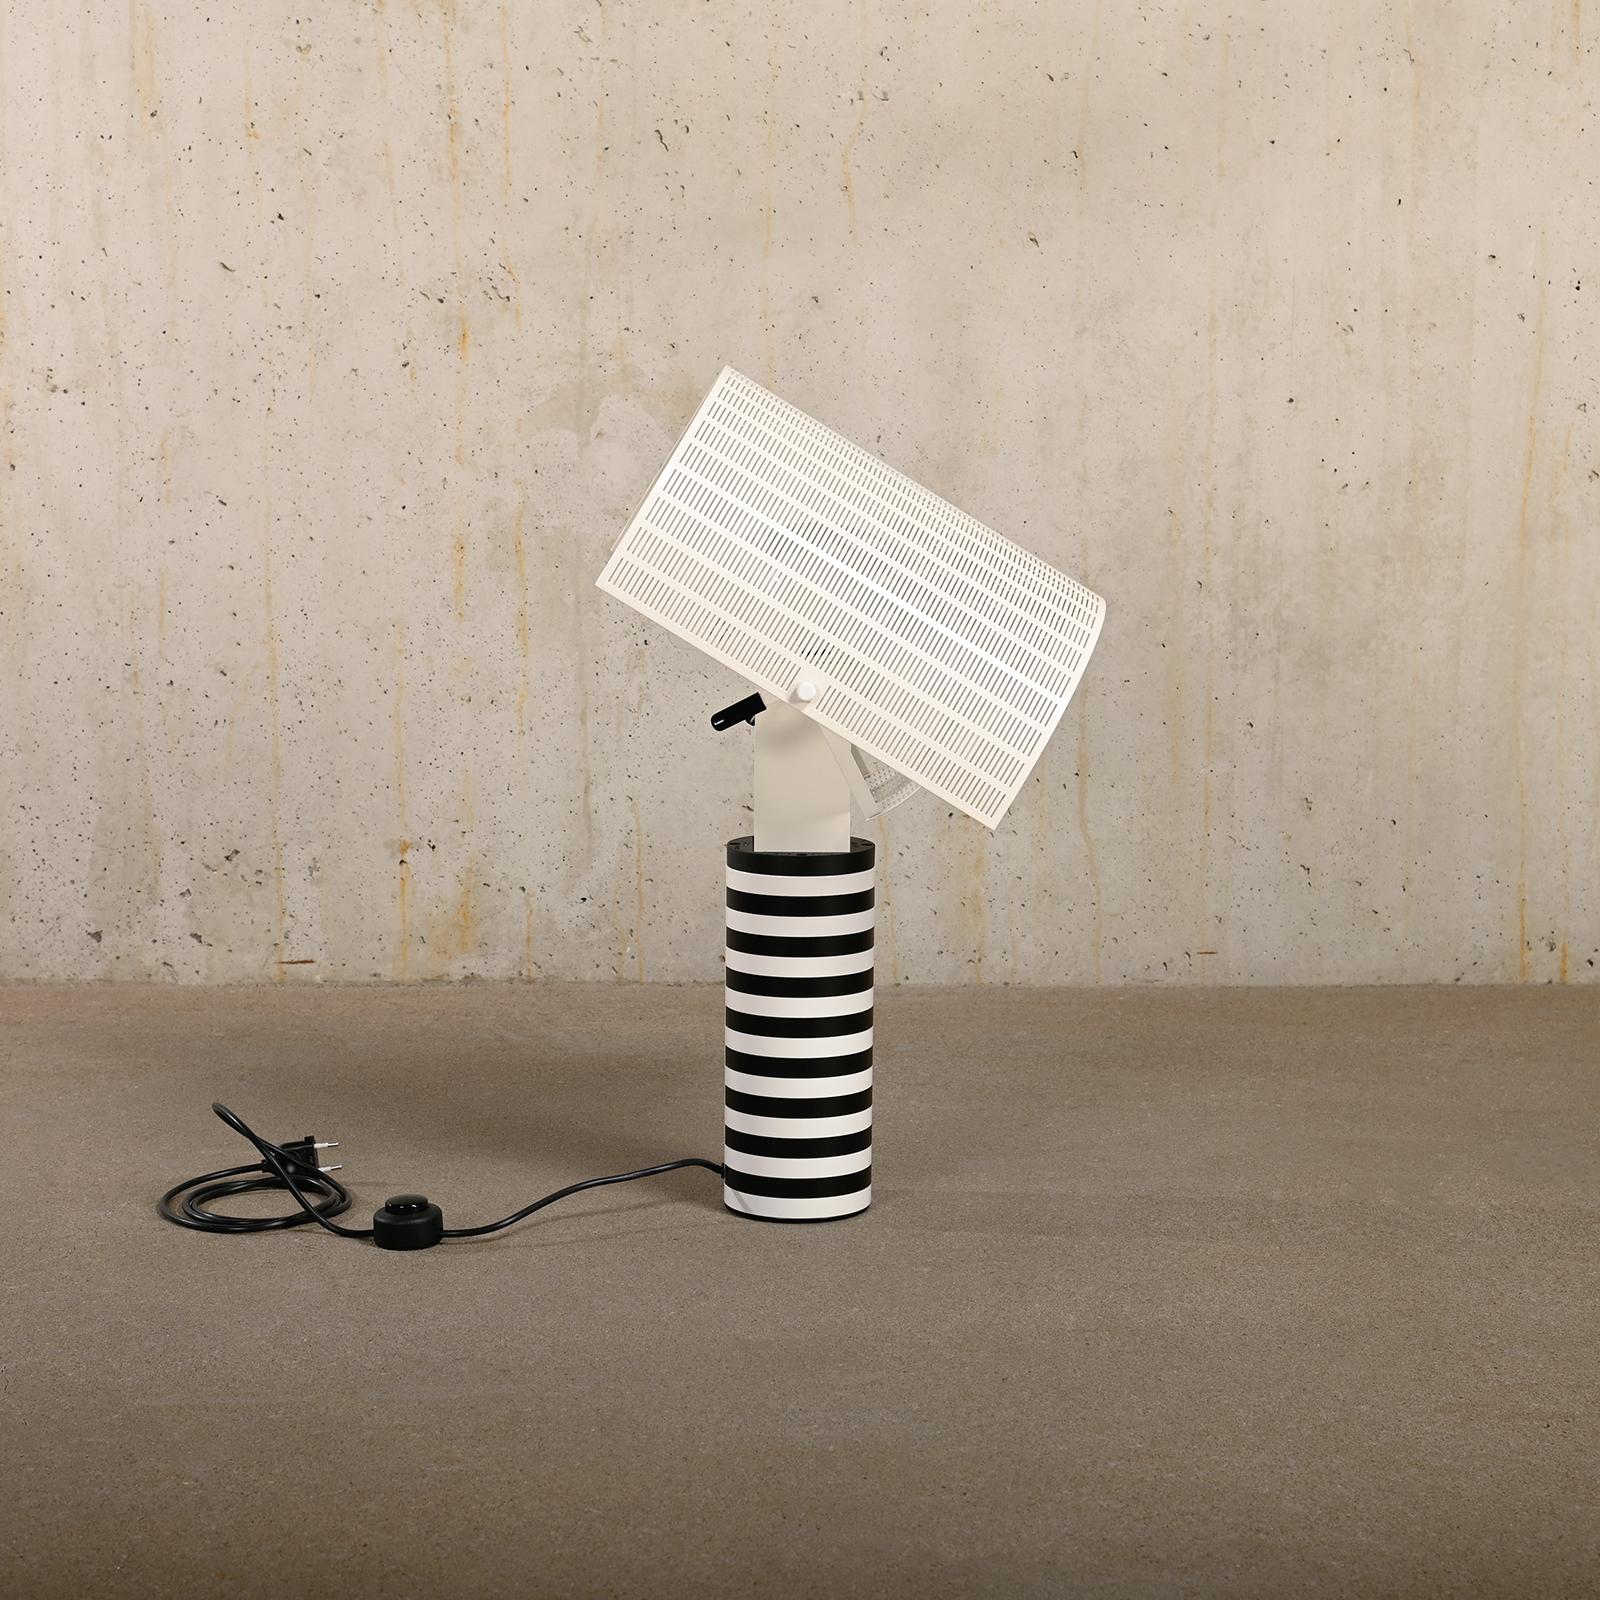 Mario Botta Shogun Table Lamp in black and white for Artemide, Italy In Excellent Condition For Sale In Amsterdam, NL